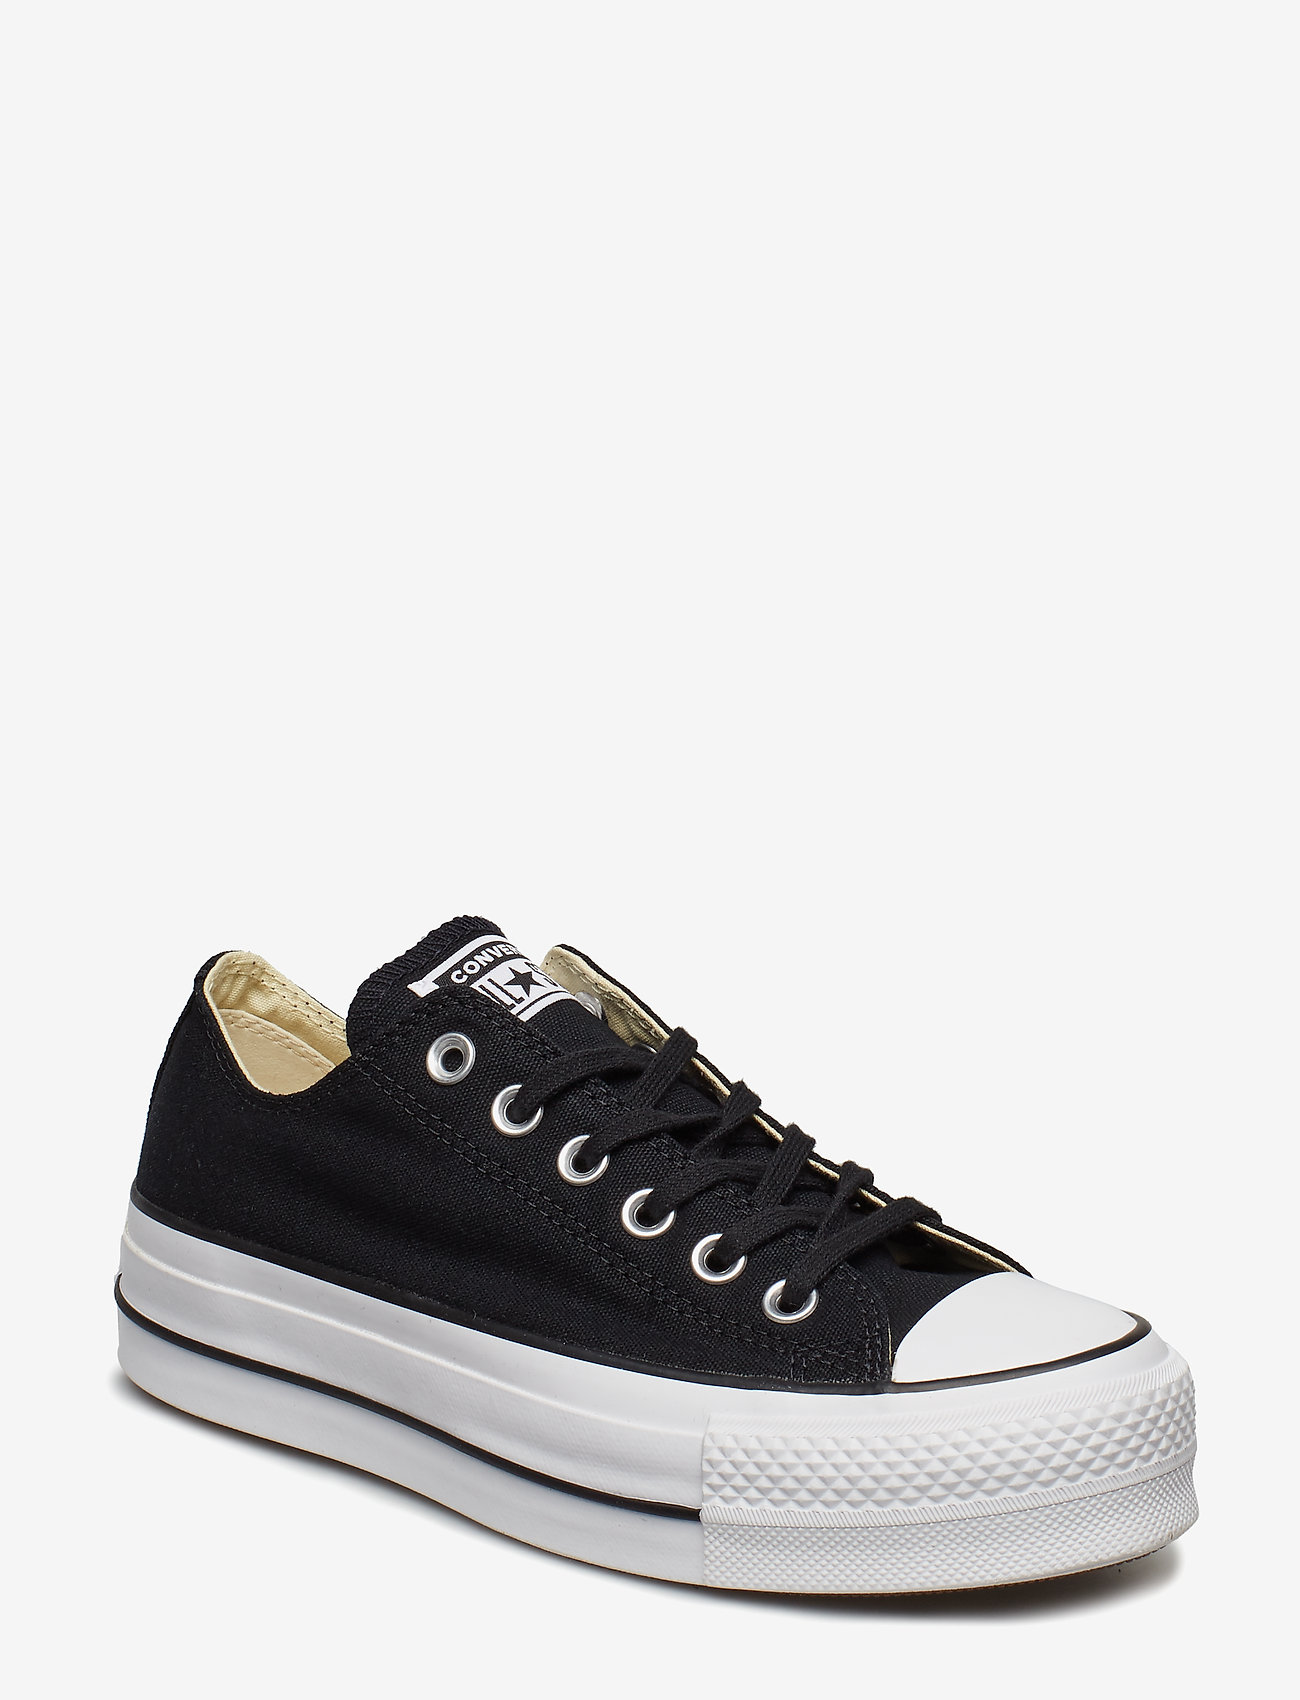 Converse - Chuck Taylor All Star Lift - lave sneakers - black/white/white - 0